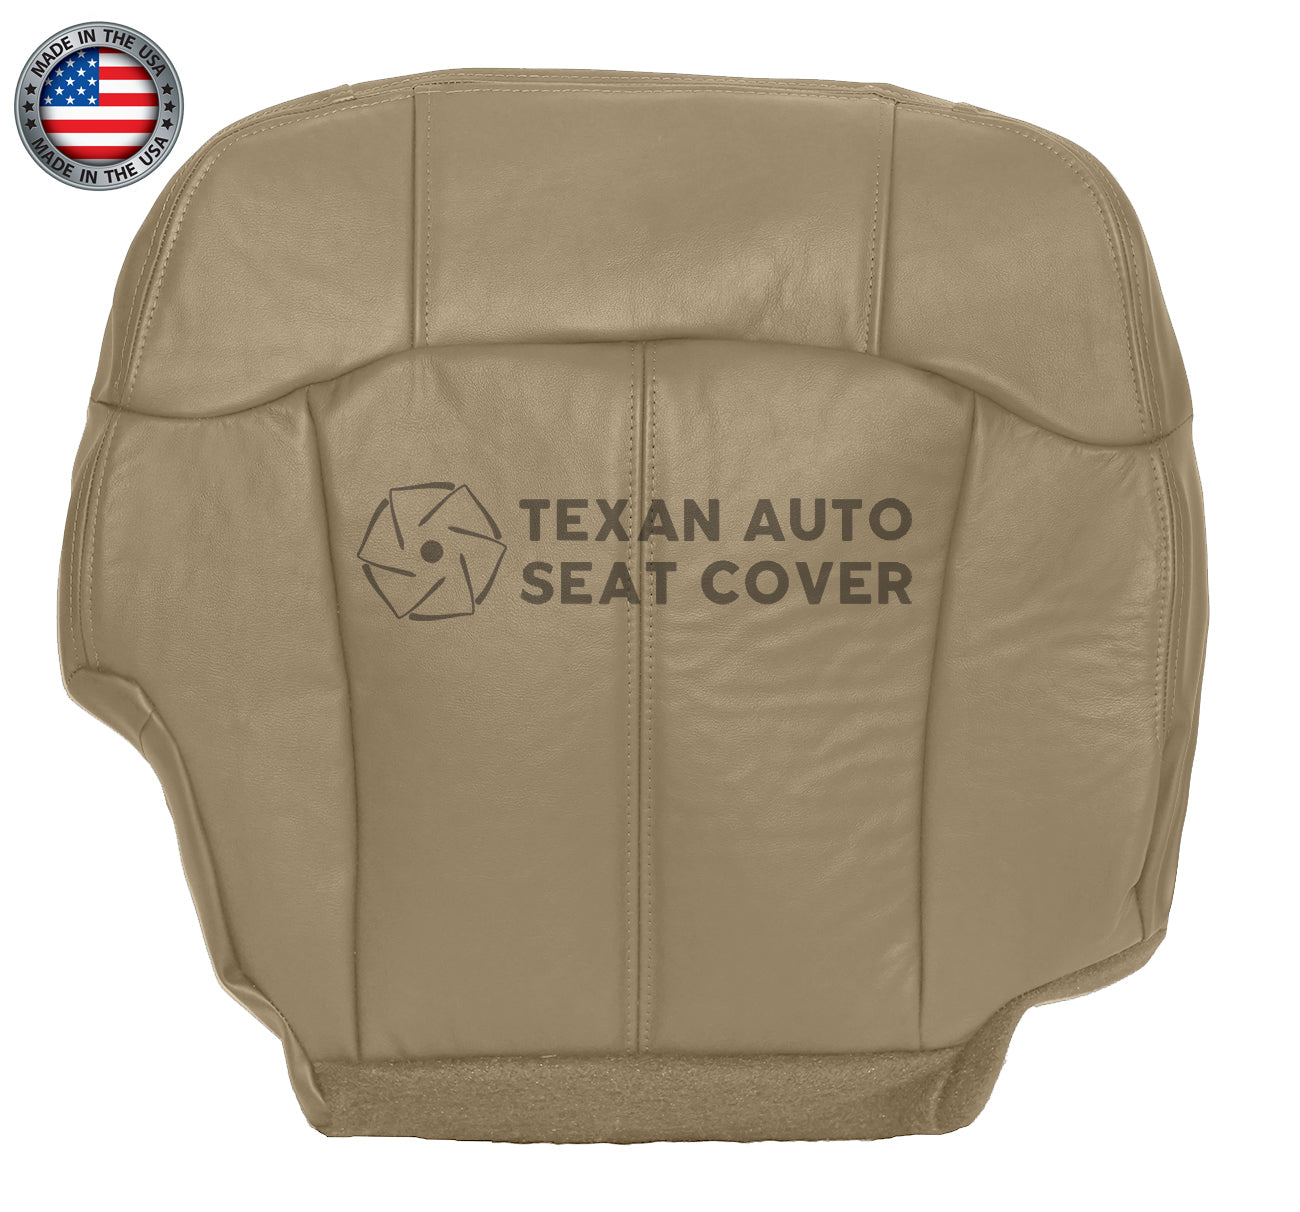 1999, 2002 Chevy Silverado Passenger Side Bottom Leather Seat Cover Tan